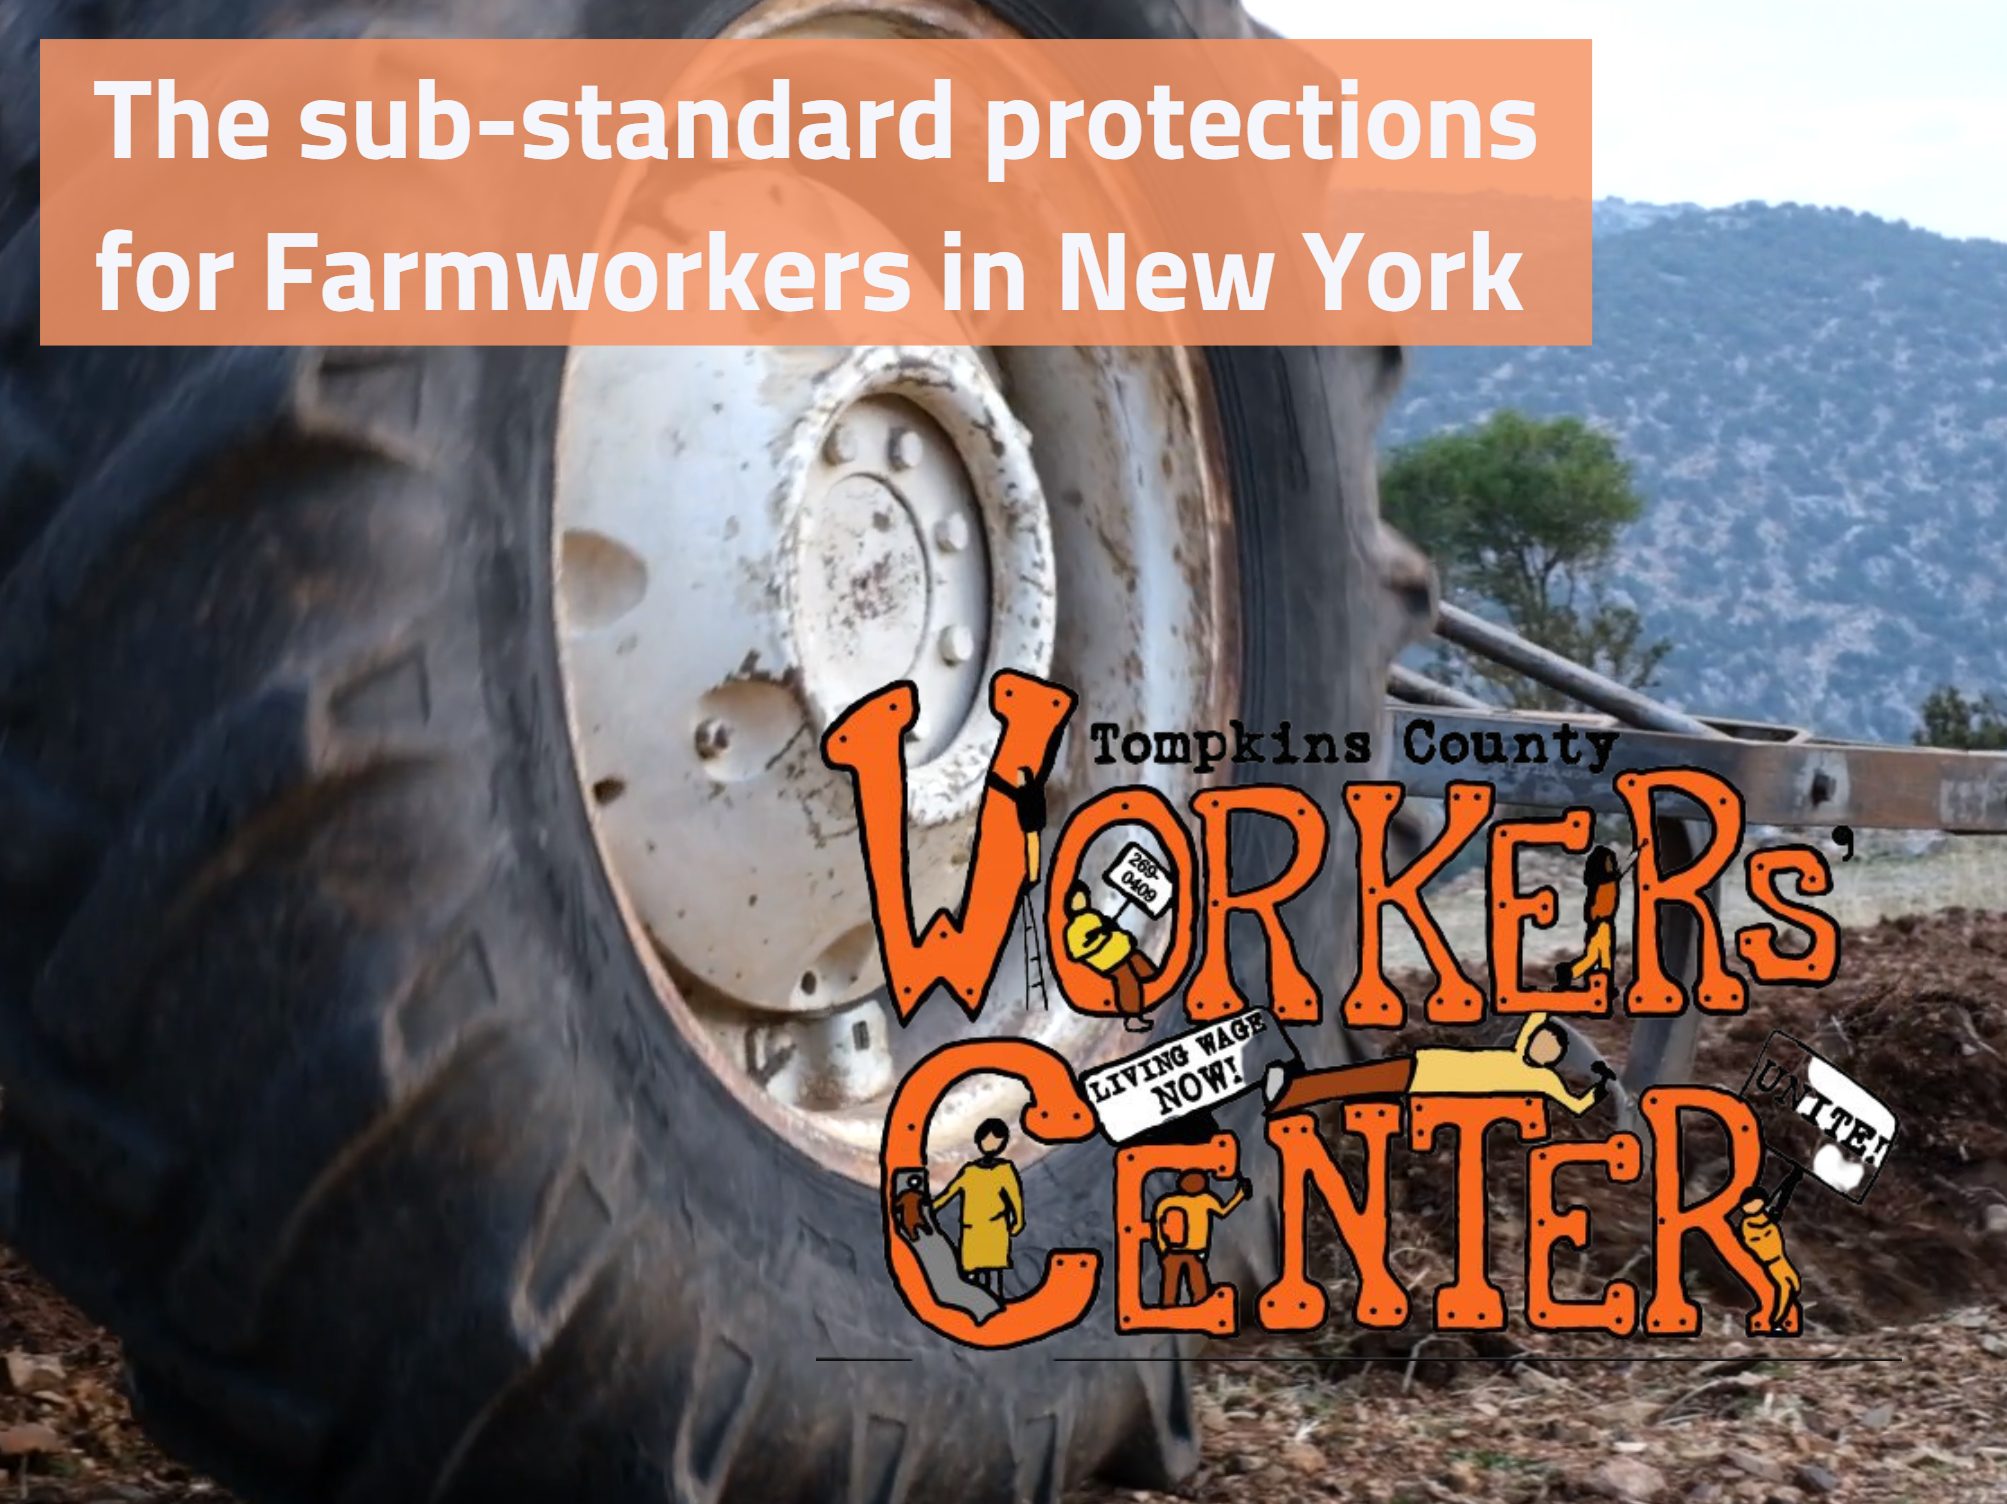 New Yorks Sub-standard labor protections for Farmworkers